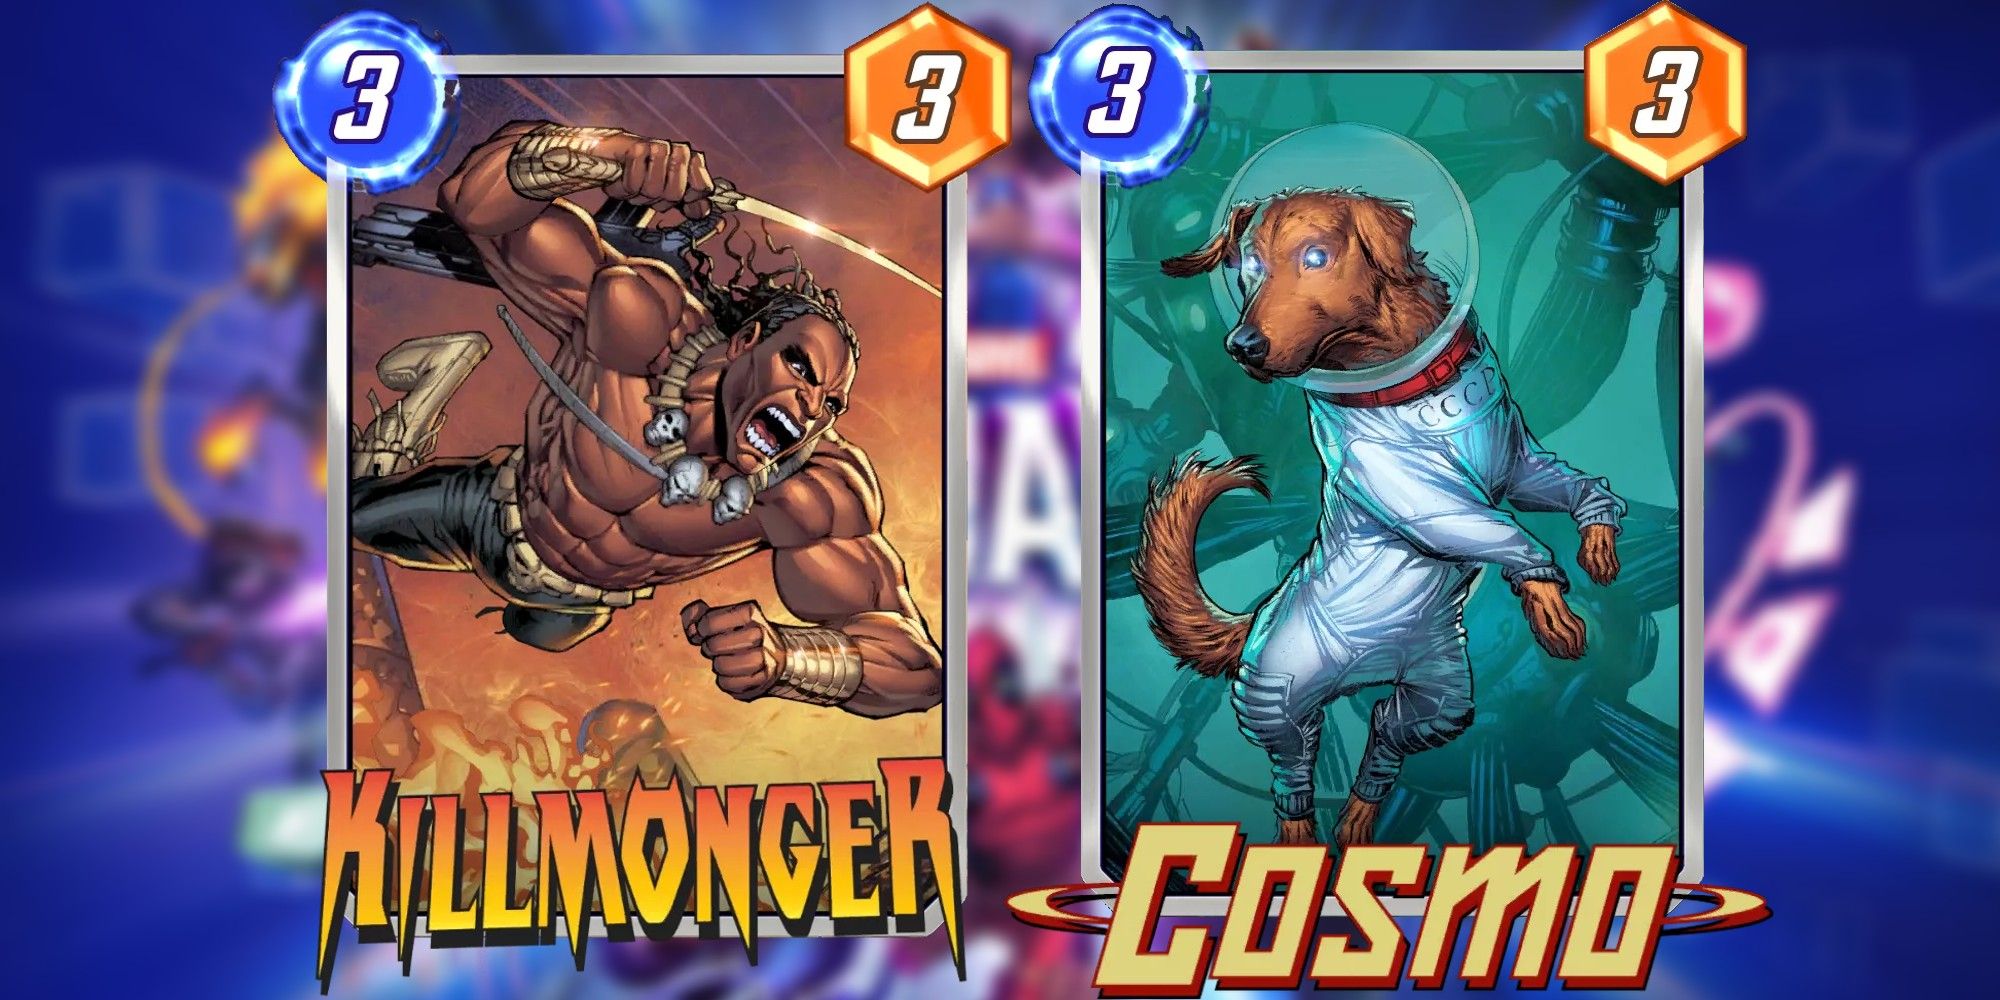 cosmo and killmonger cards